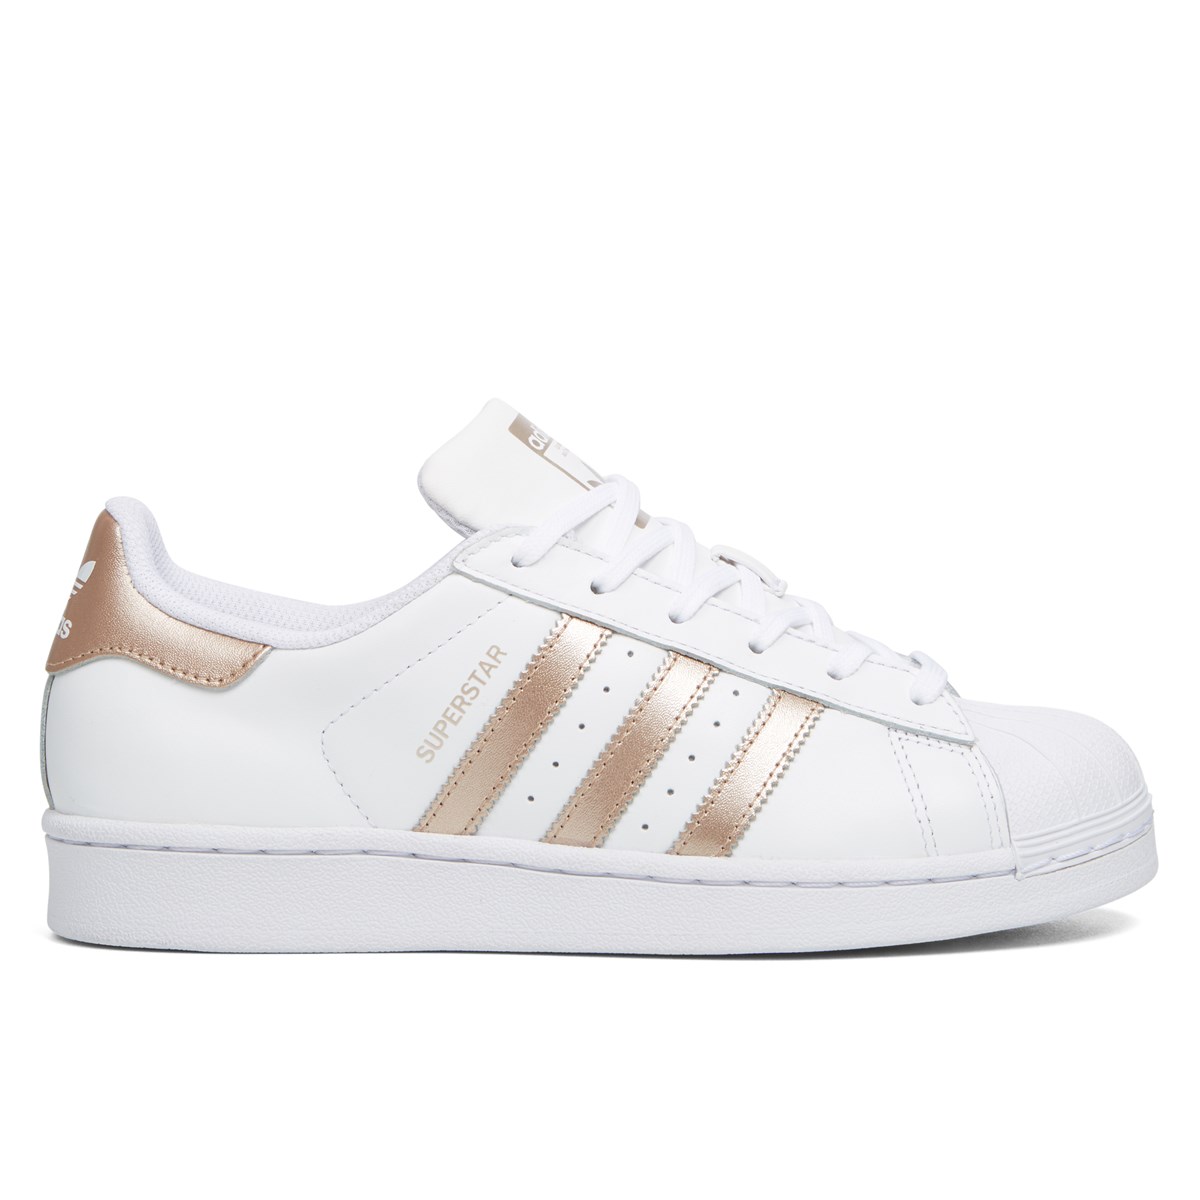 Women's Leather Superstar Sneaker in White and Rose Gold | Little Burgundy